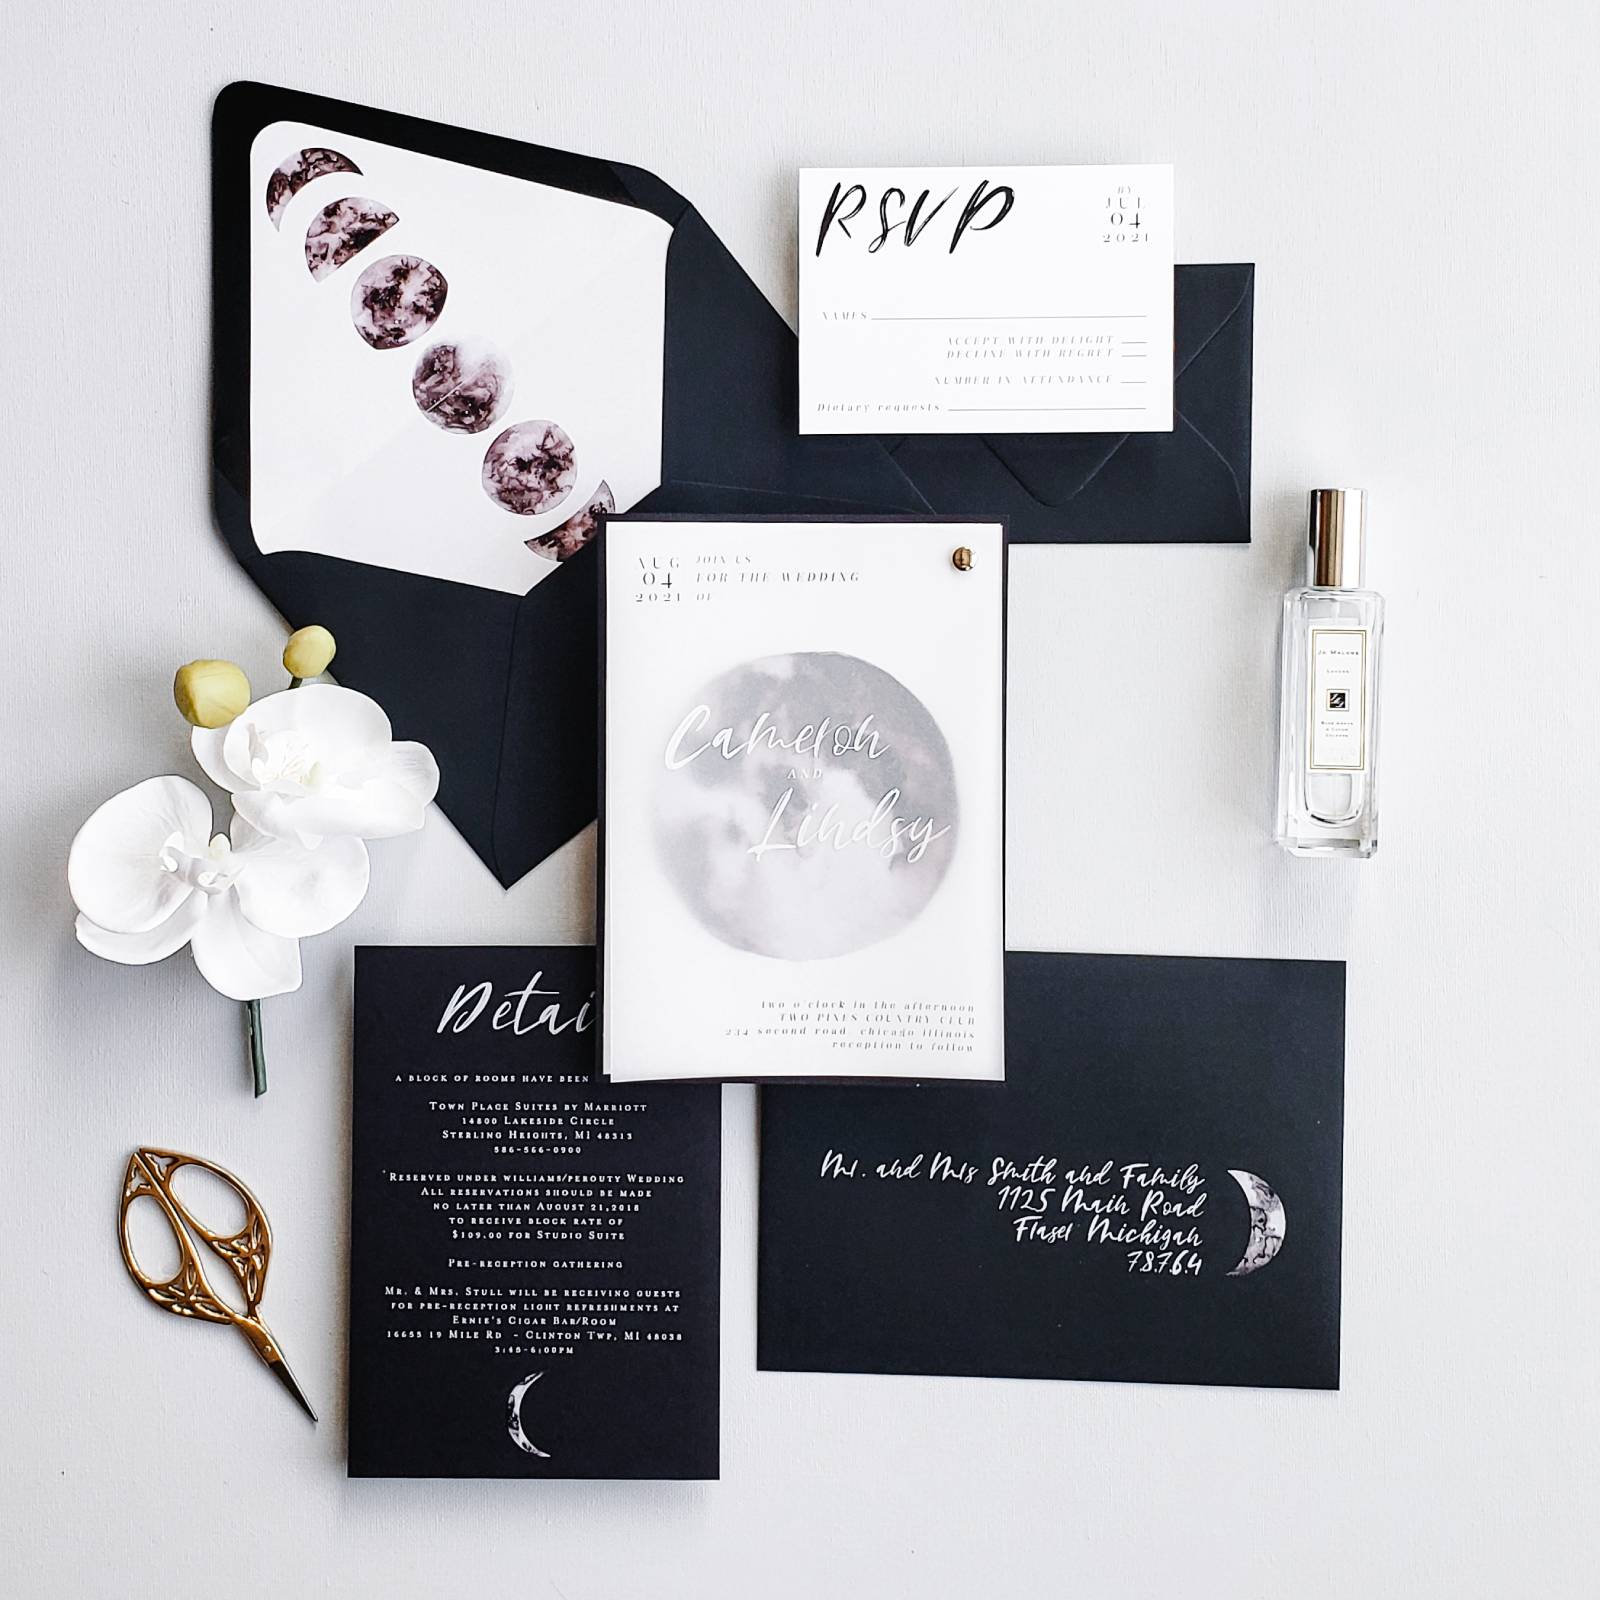 [vc_row][vc_column][vc_column_text]Purchase this listing to get a sample of our Lunar wedding invitation suite.

The sample includes:

• 5.25